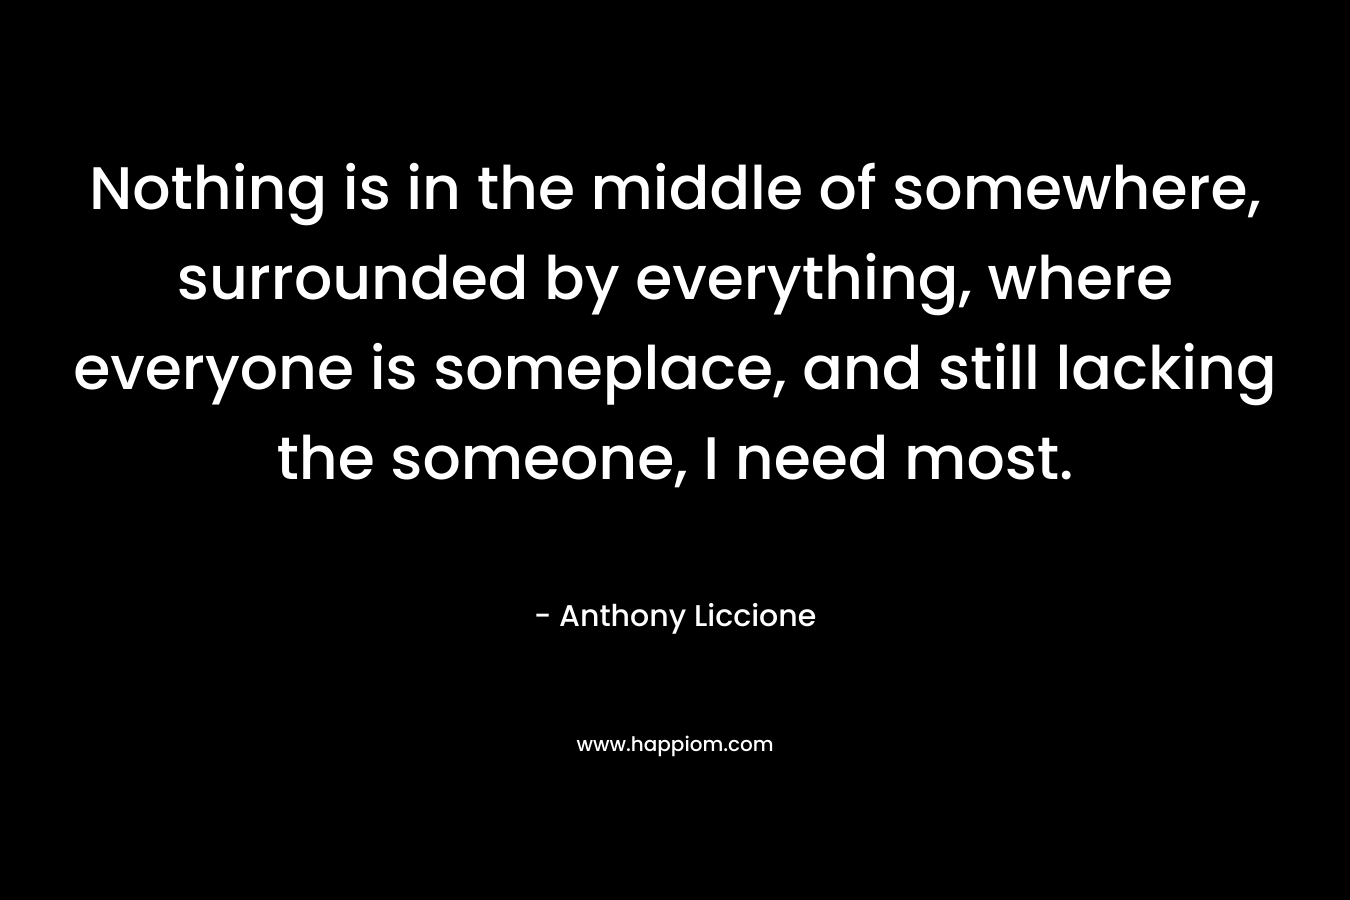 Nothing is in the middle of somewhere, surrounded by everything, where everyone is someplace, and still lacking the someone, I need most.